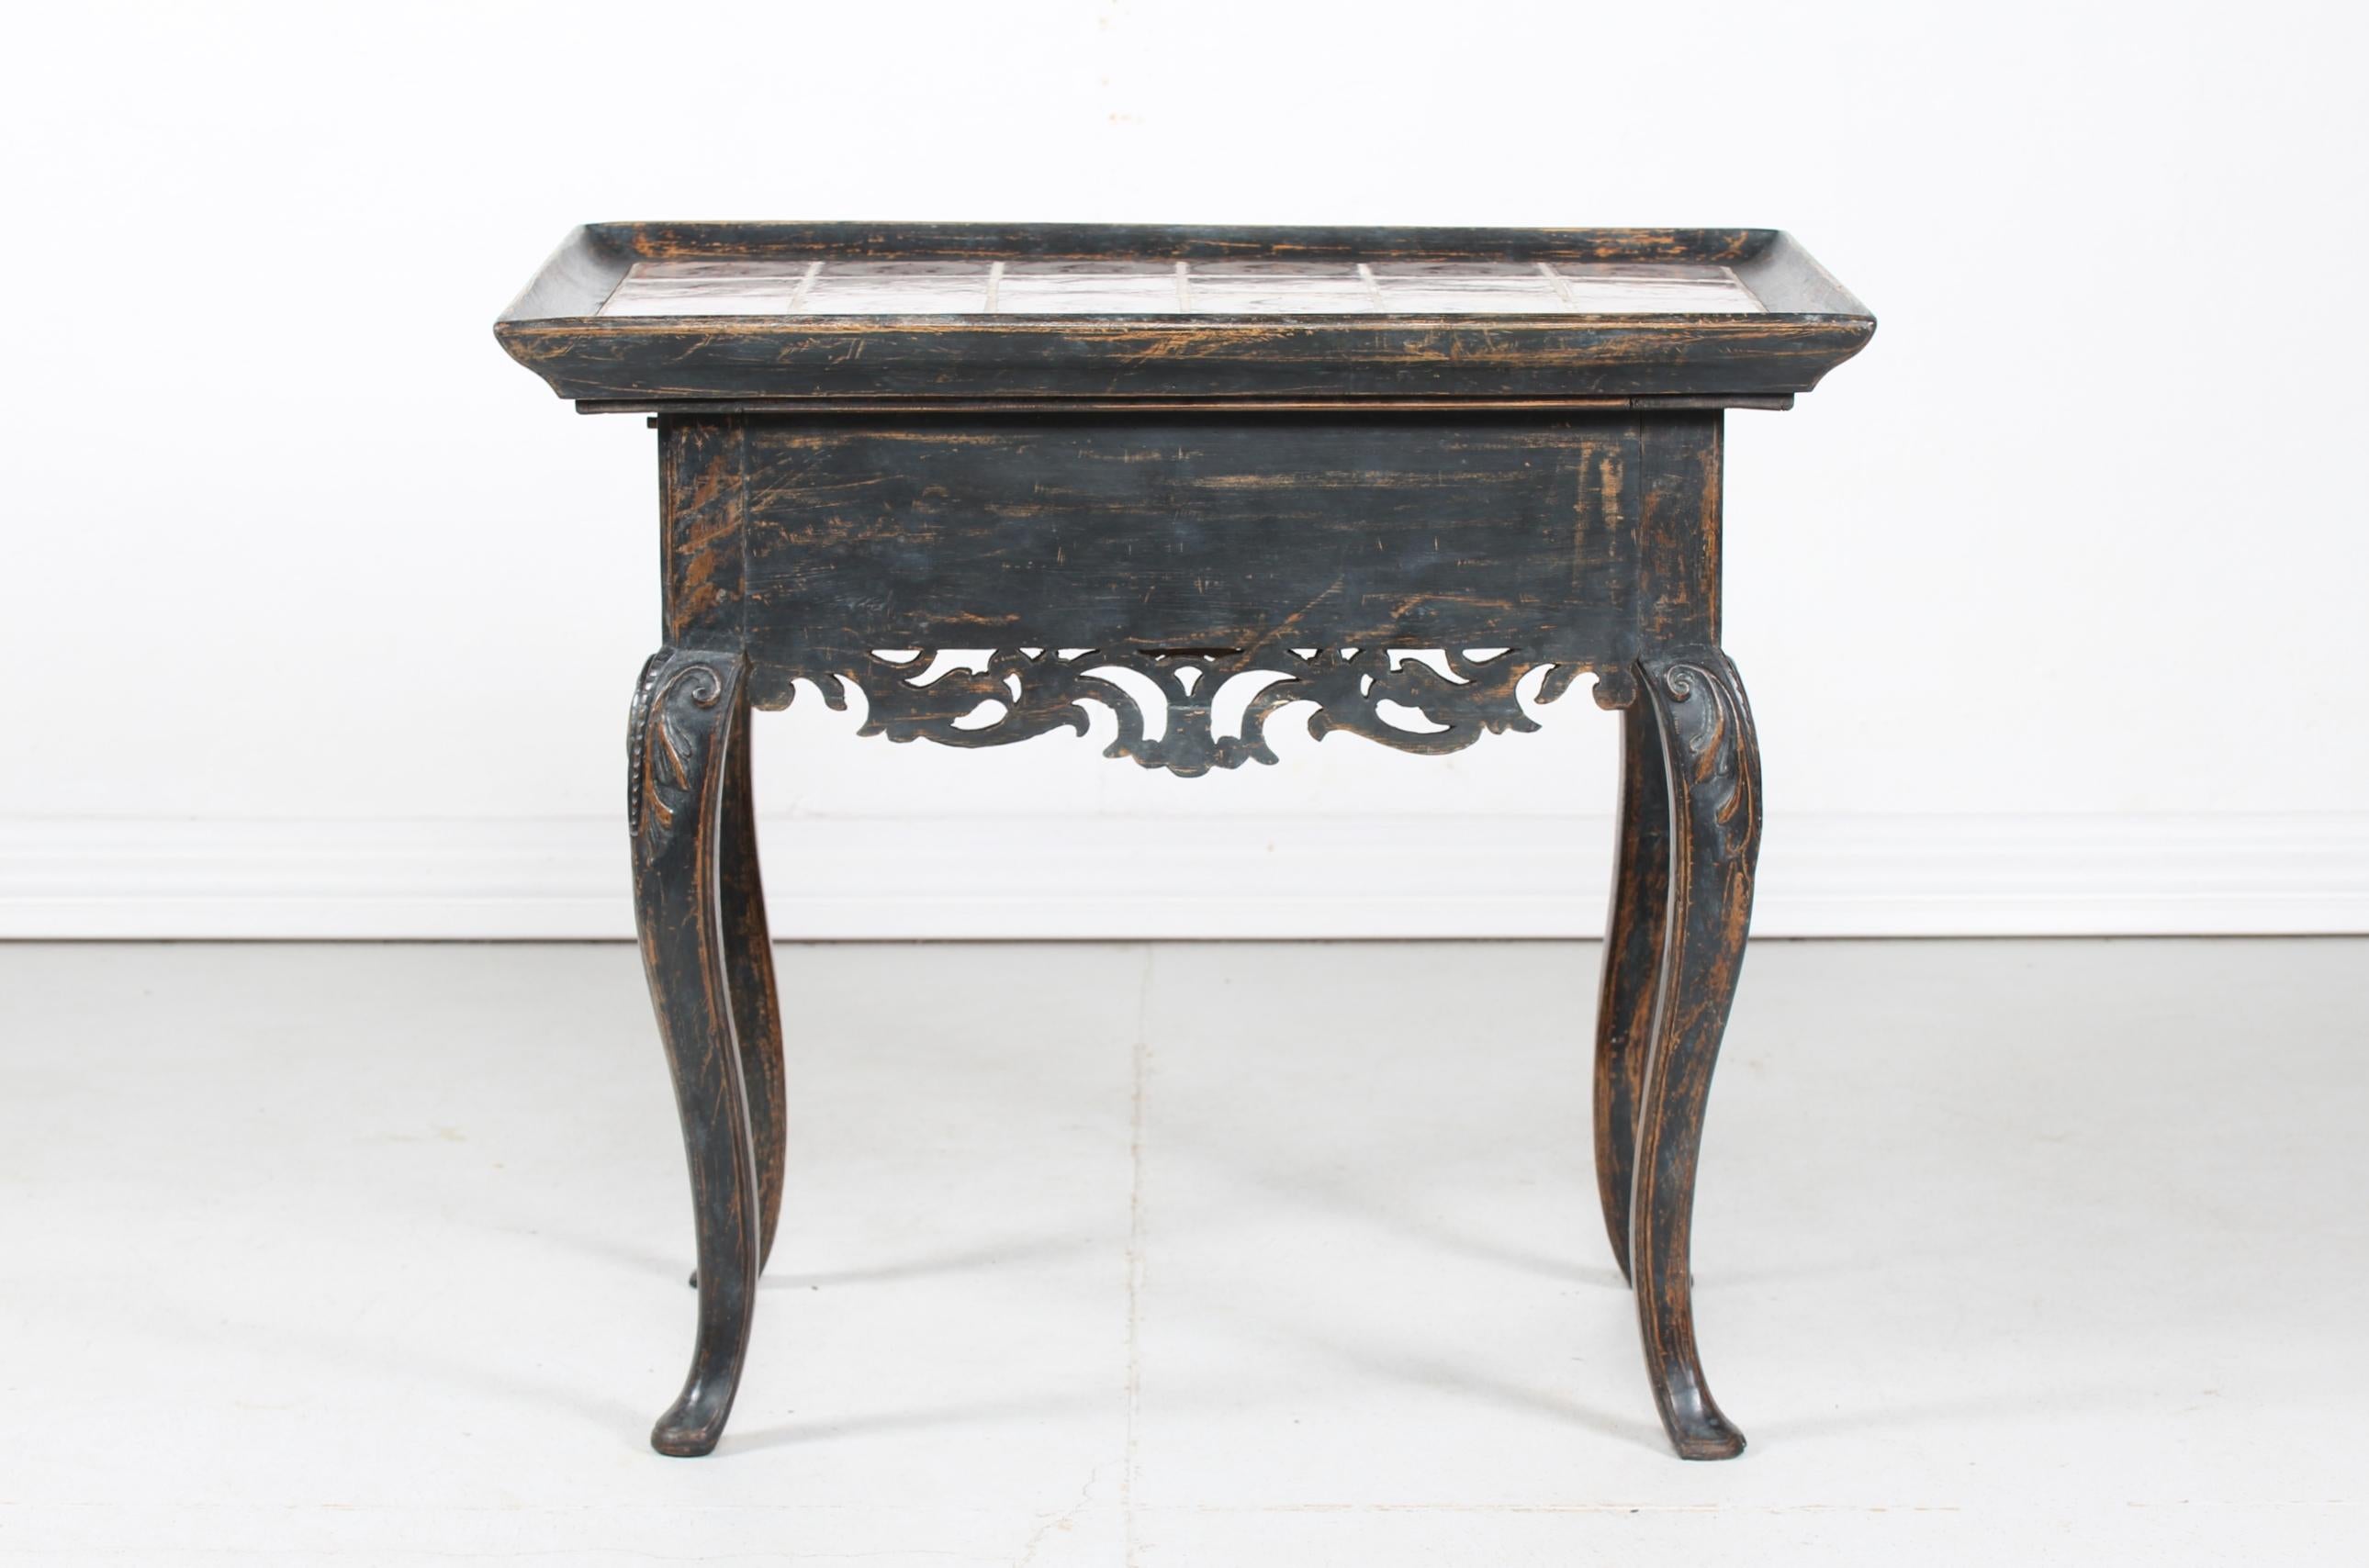 Scandinavian Rococo Table from the 19th Century with Dutch Handpainted Tiles 1